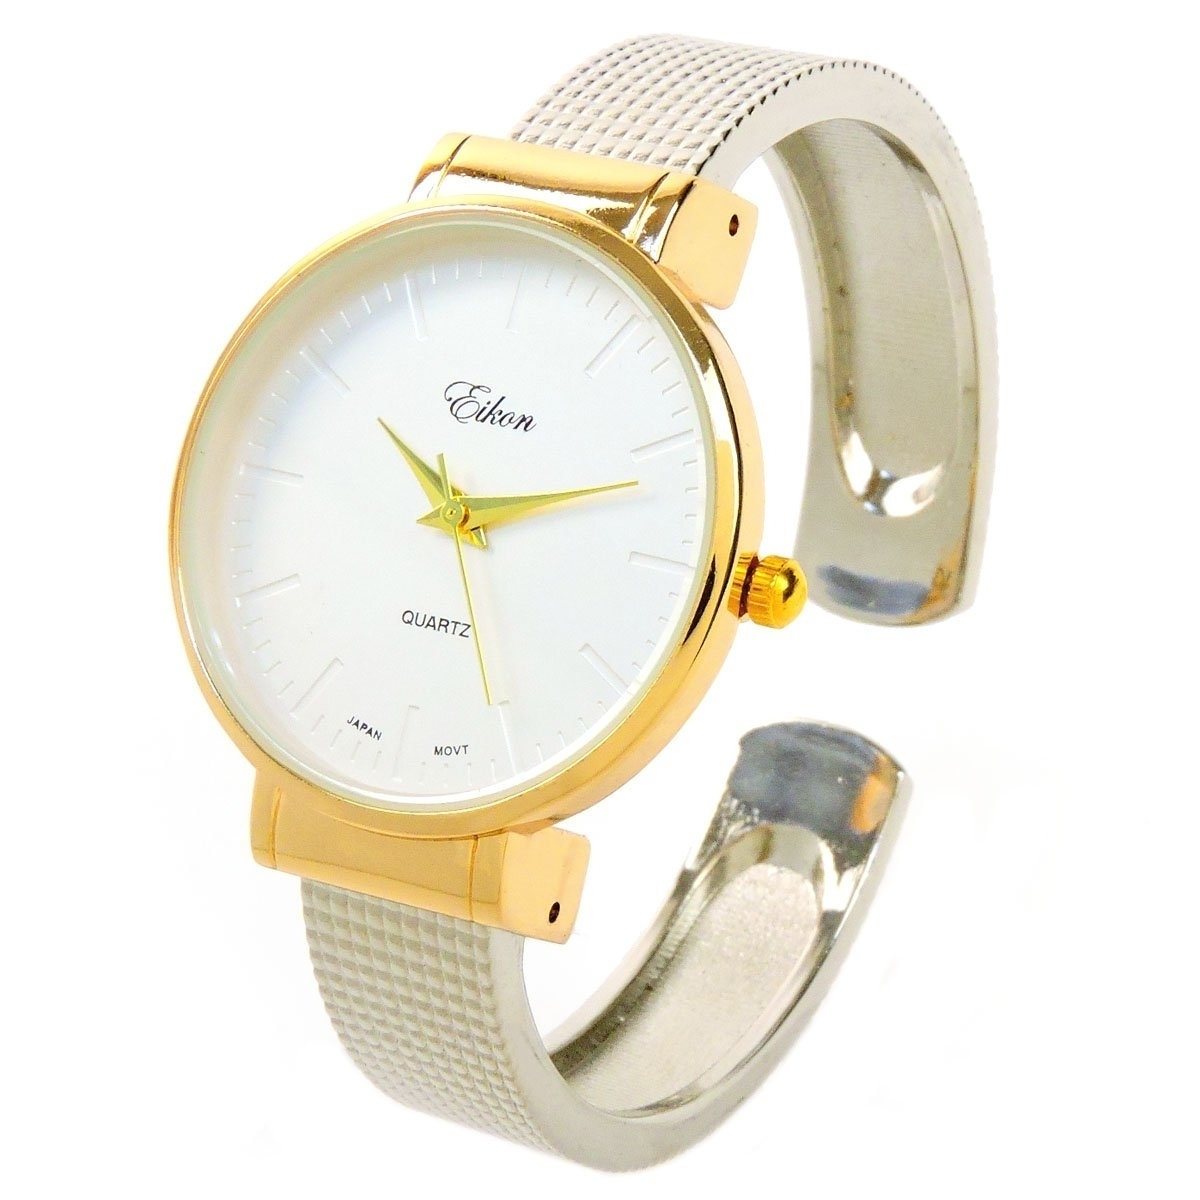 2Tone Mesh Style Band Large Dial Easy To Read Women's Bangle Cuff Watch